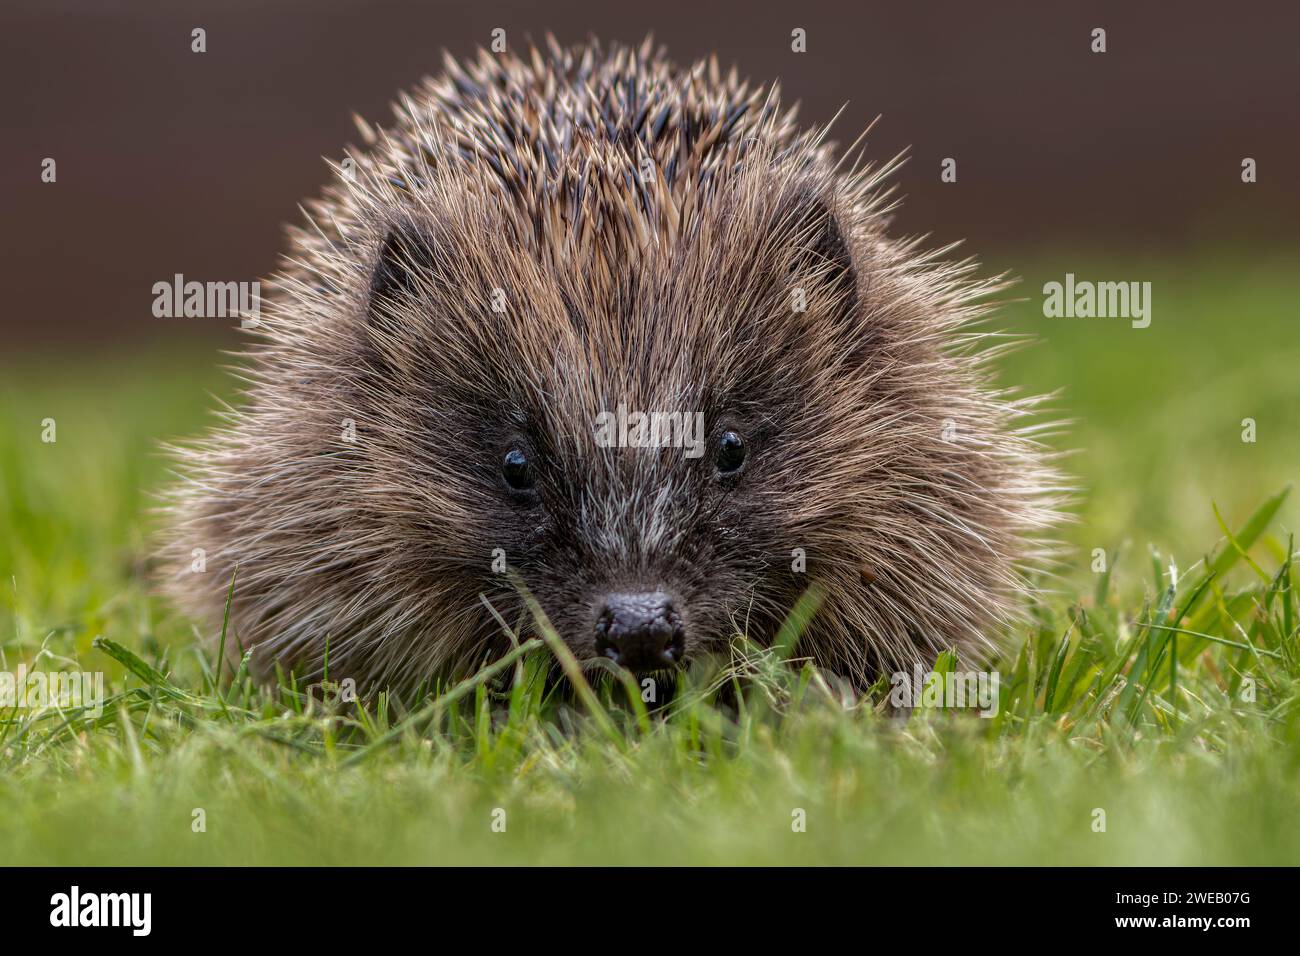 Documentary image of a european hedgehog in a rescue centre in the UK, released into a garden Stock Photo